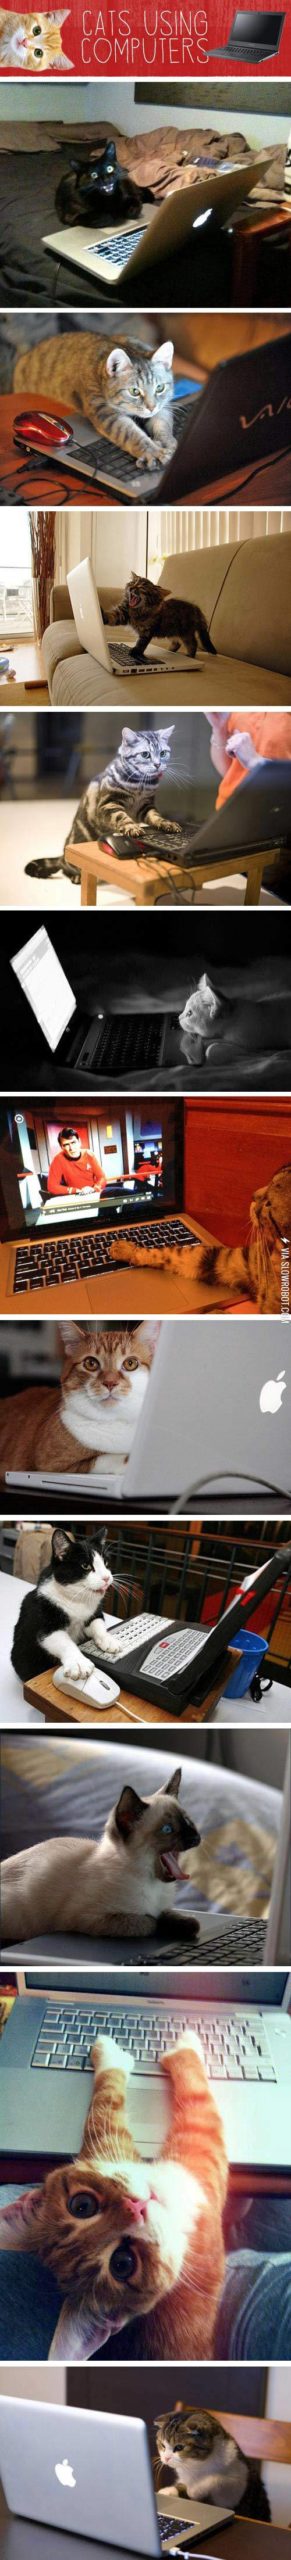 Cats+using+computers